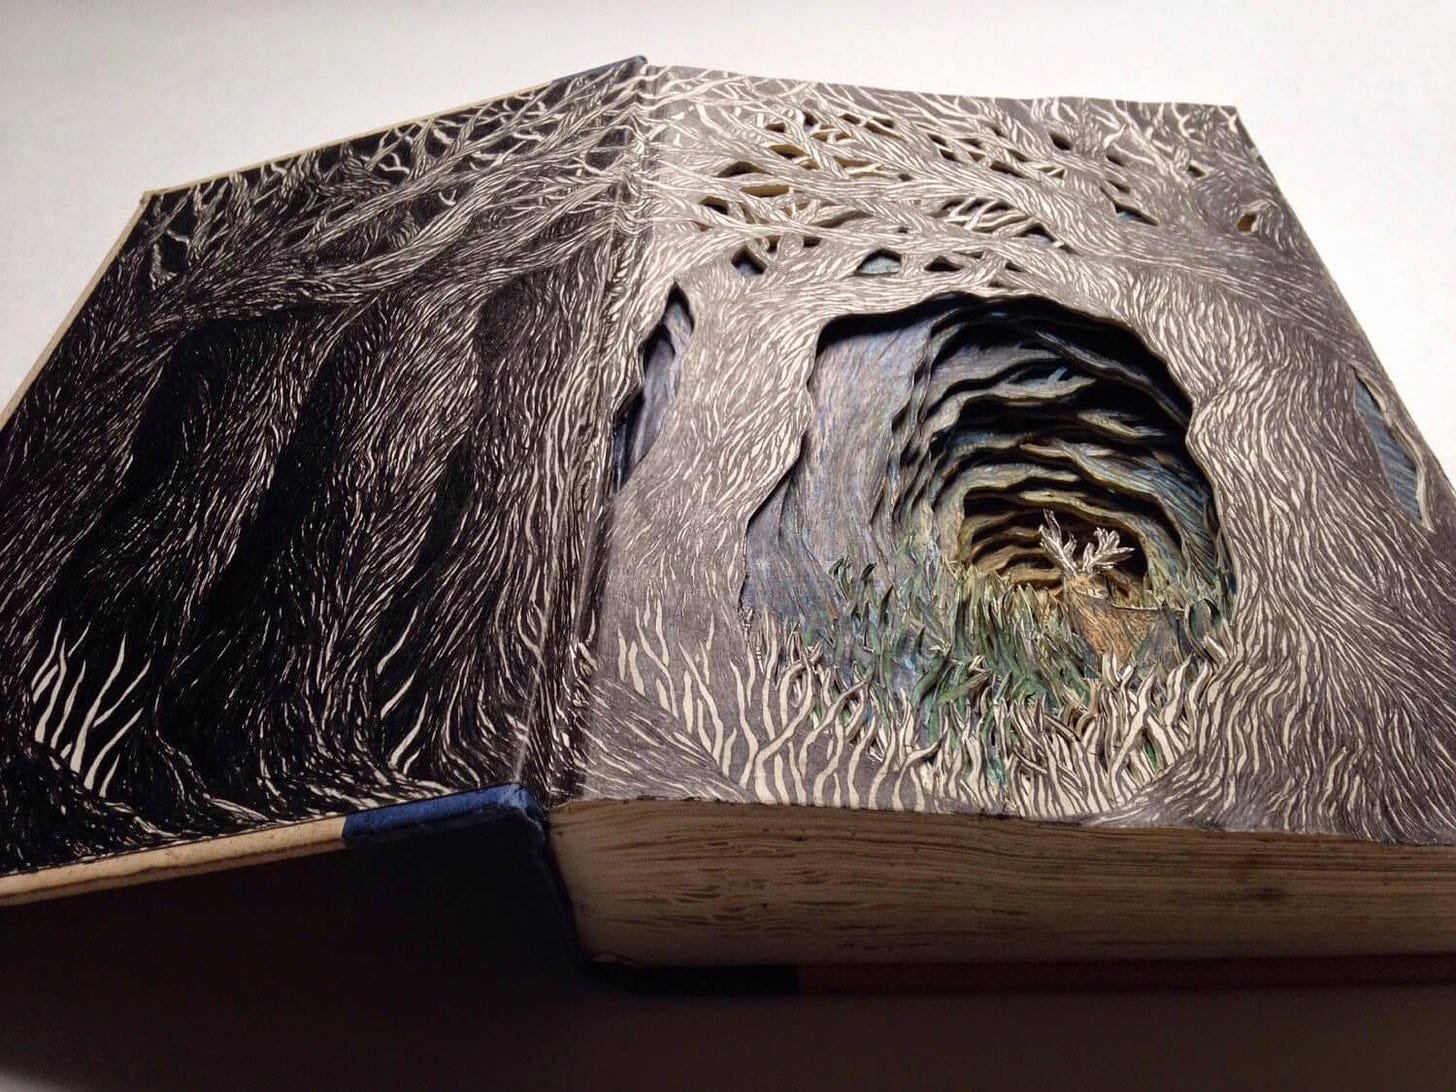 3D sculptures made from books by Isobelle Ouzman - Design Father